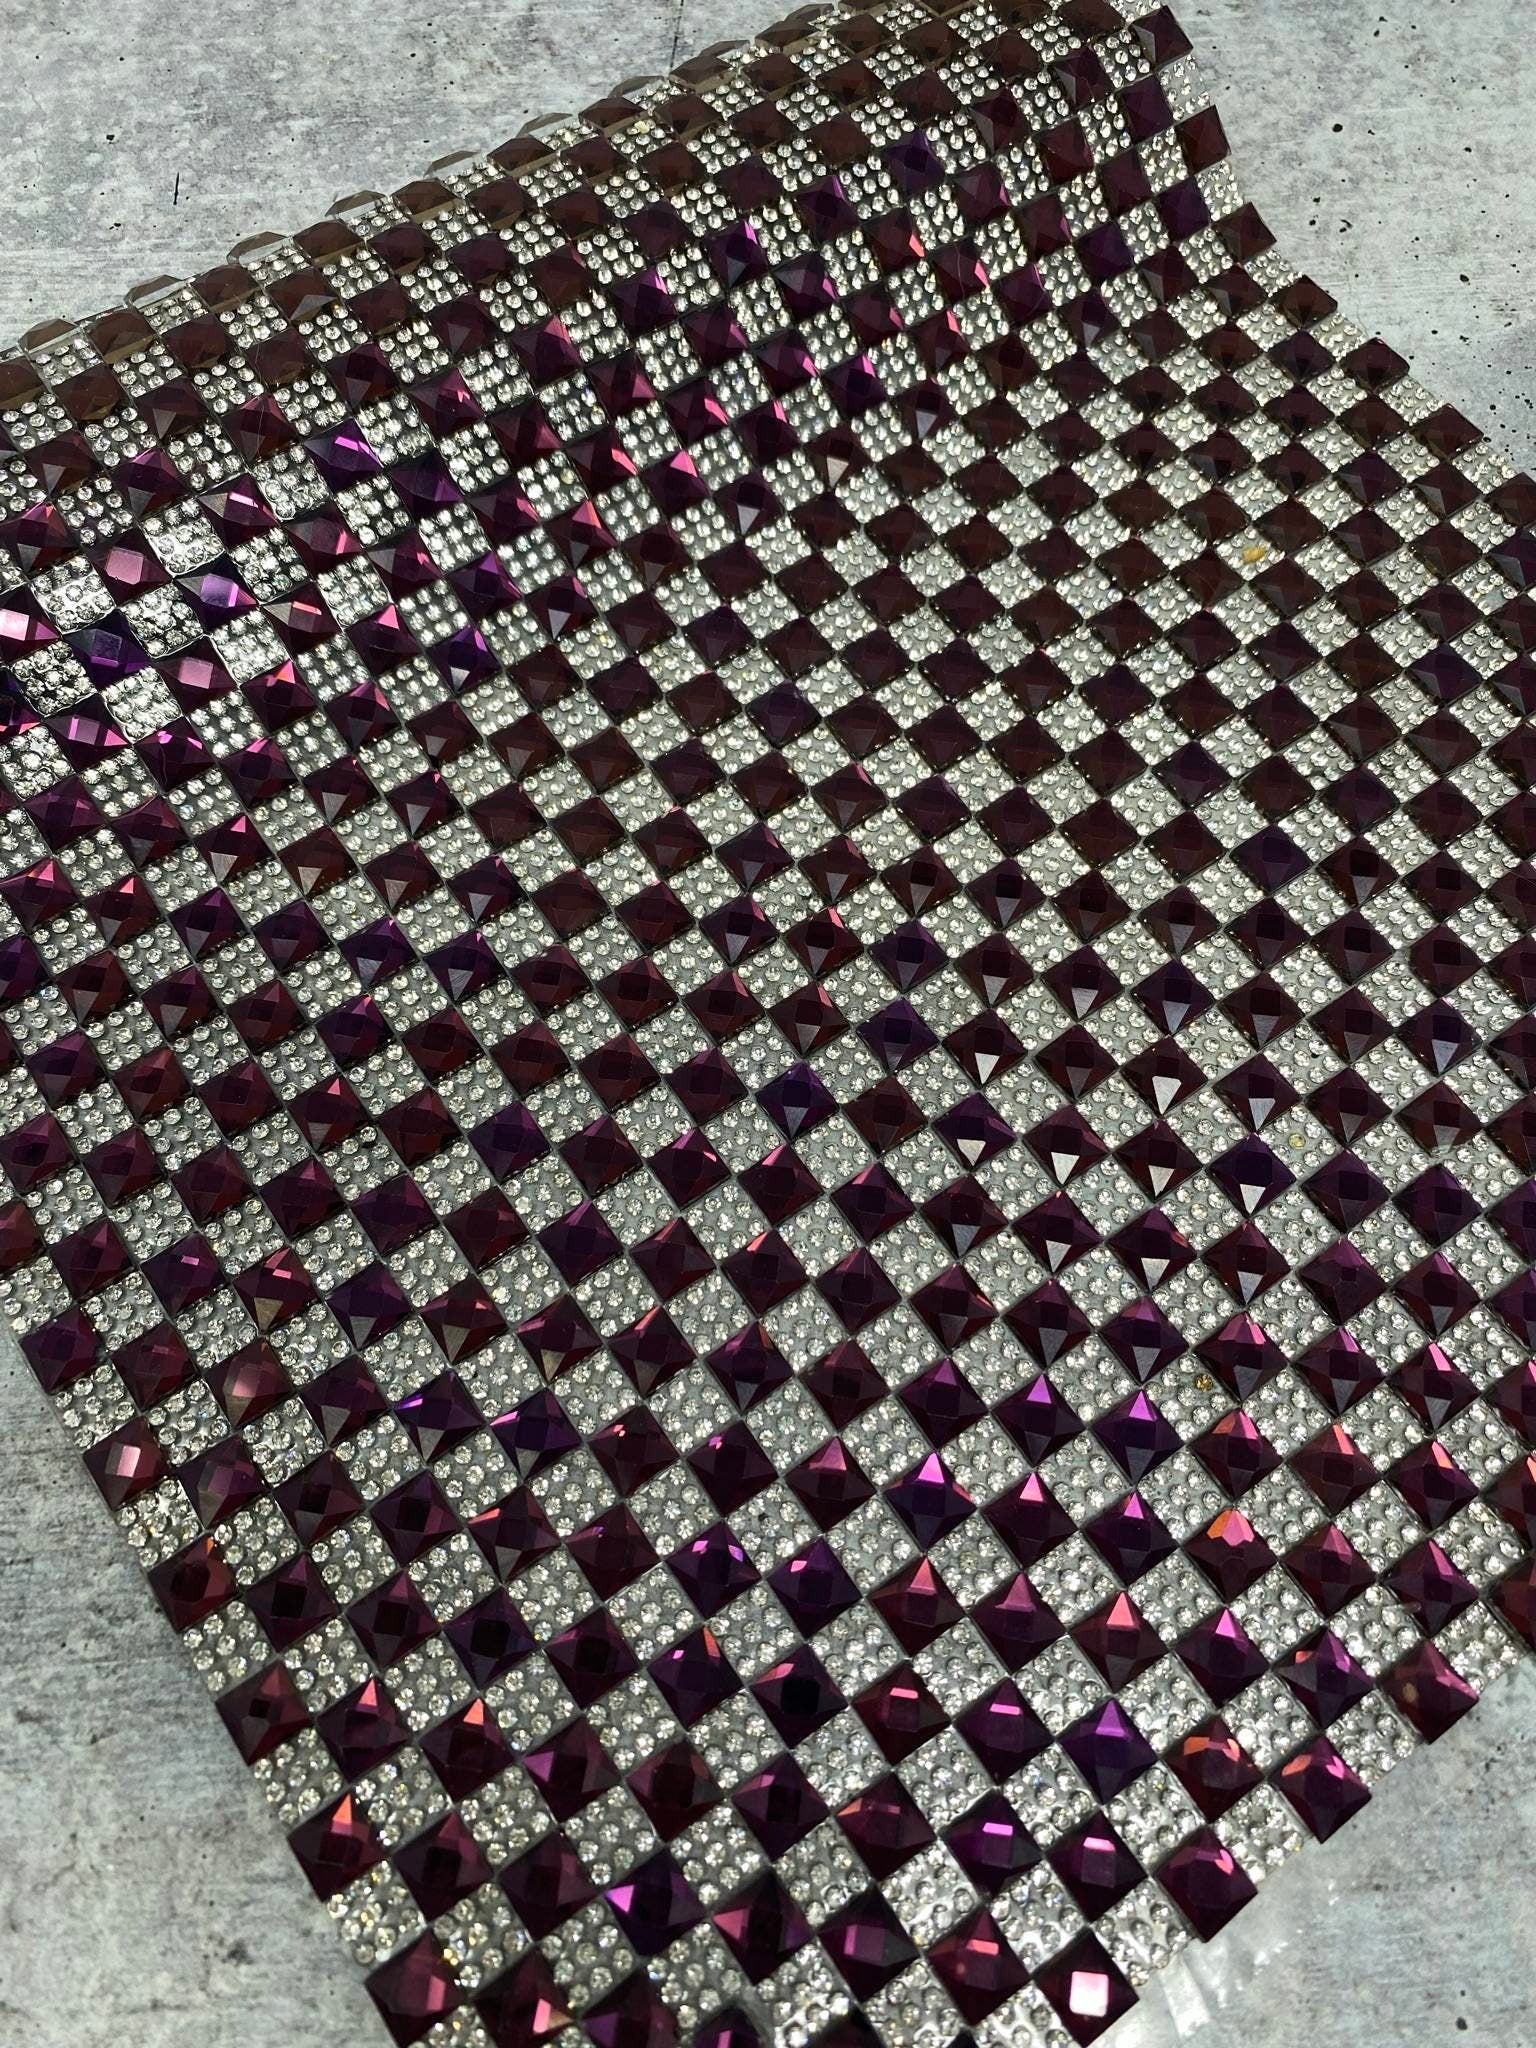 Glass "PURPLE & Silver" Squares,Hot-fix Rhinestone Sheet for Crafts Blinging: Shoes, Handbags, Wine Glasses and More, 10" x 16.5" sz